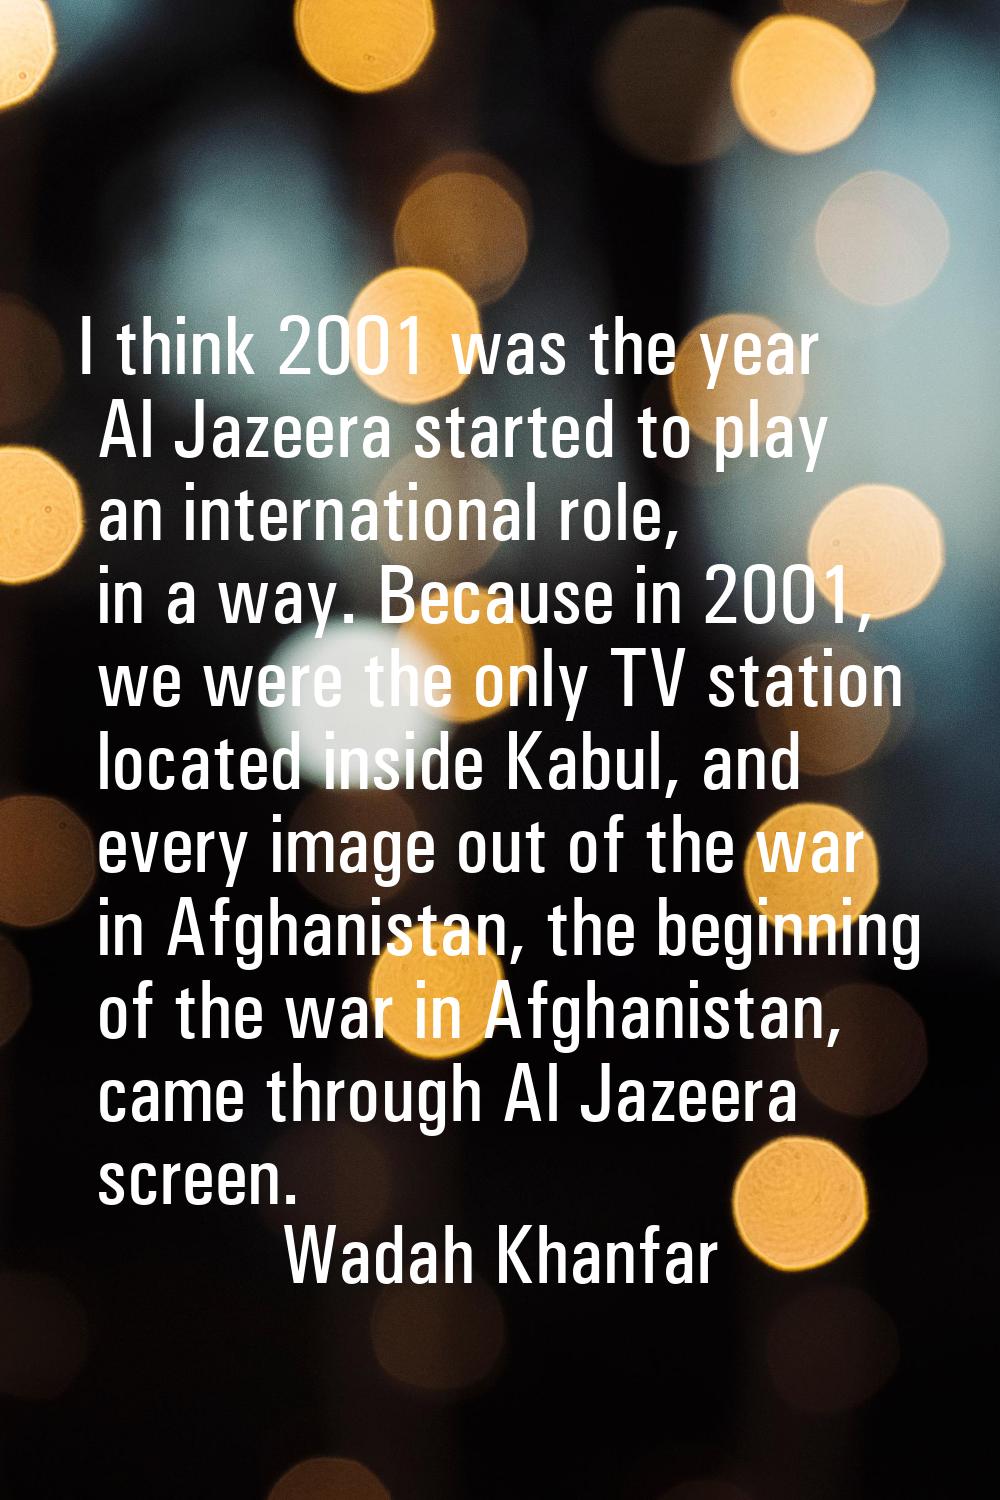 I think 2001 was the year Al Jazeera started to play an international role, in a way. Because in 20